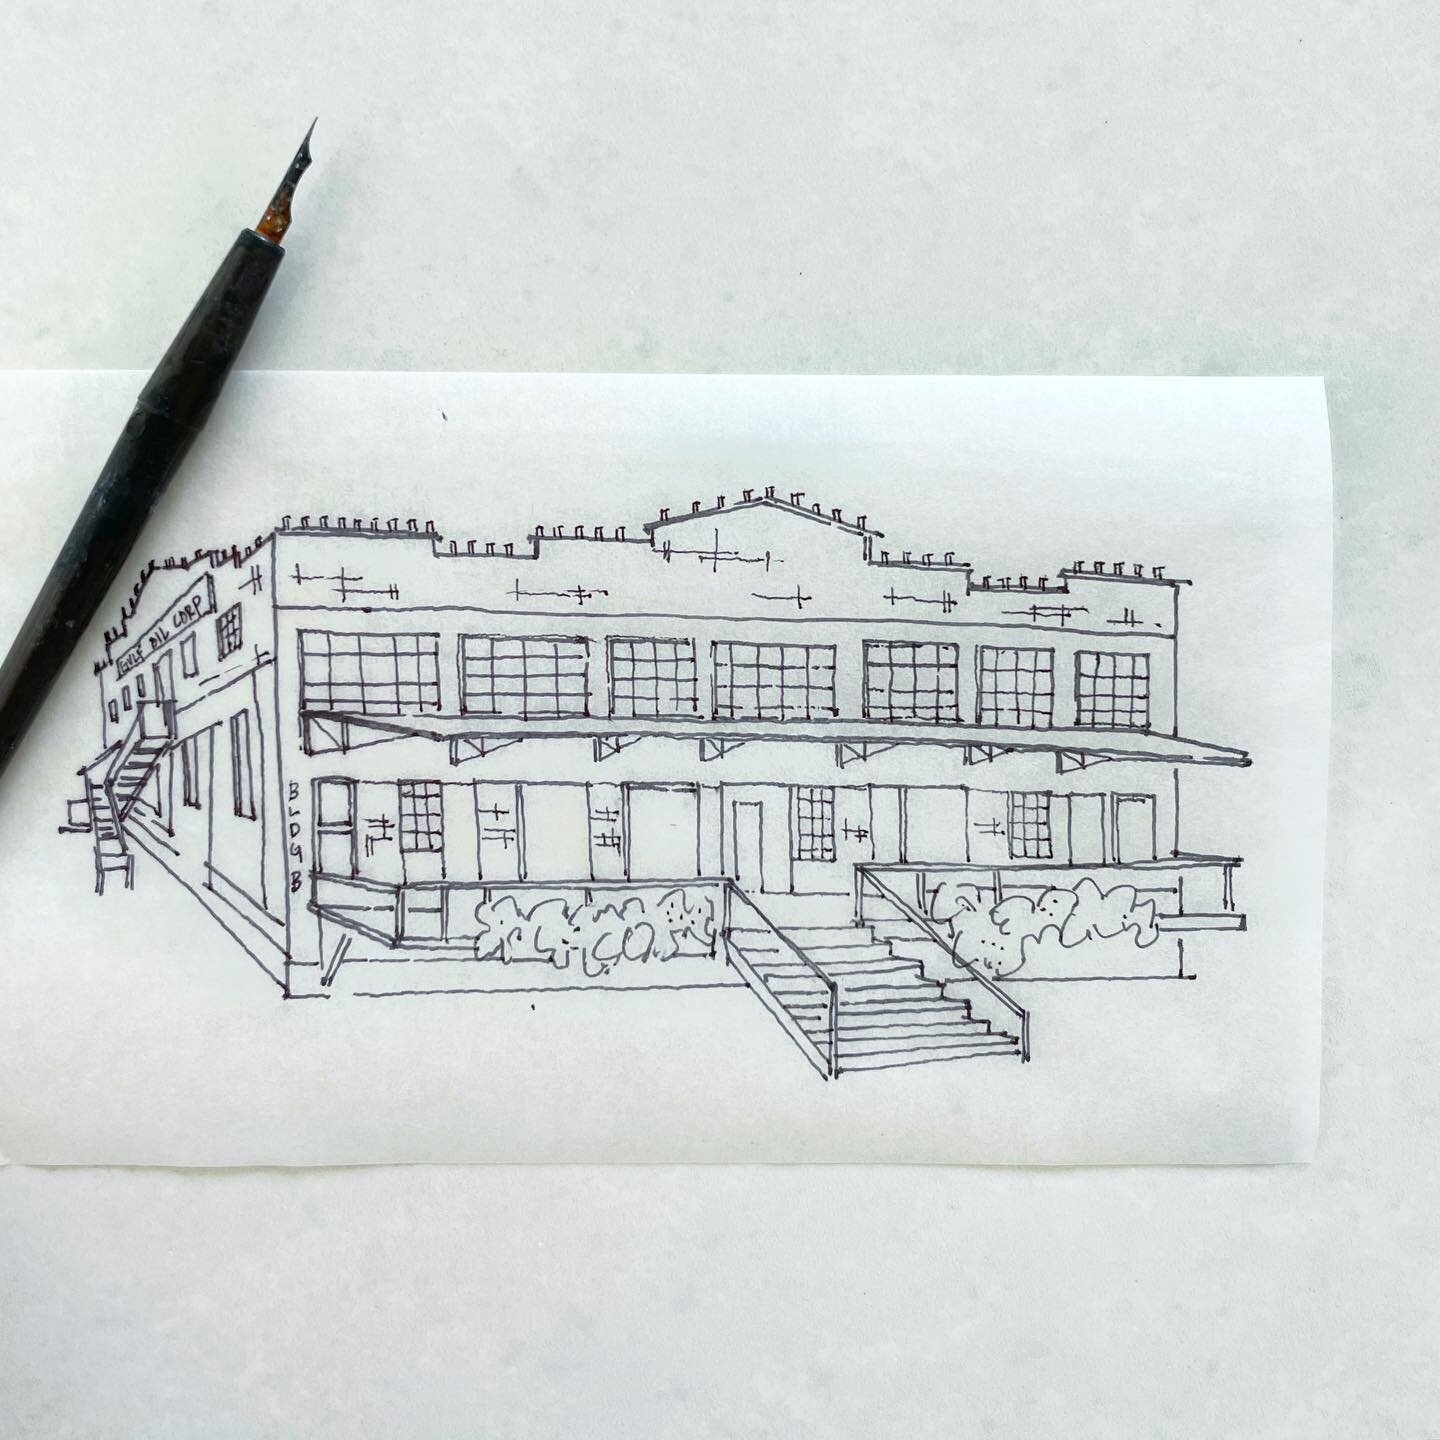 No, I do not use the calligraphy pen, but it makes for a nice prop. Line drawing of @hickorystreetannex - can&rsquo;t wait to show y&rsquo;all how these all came together